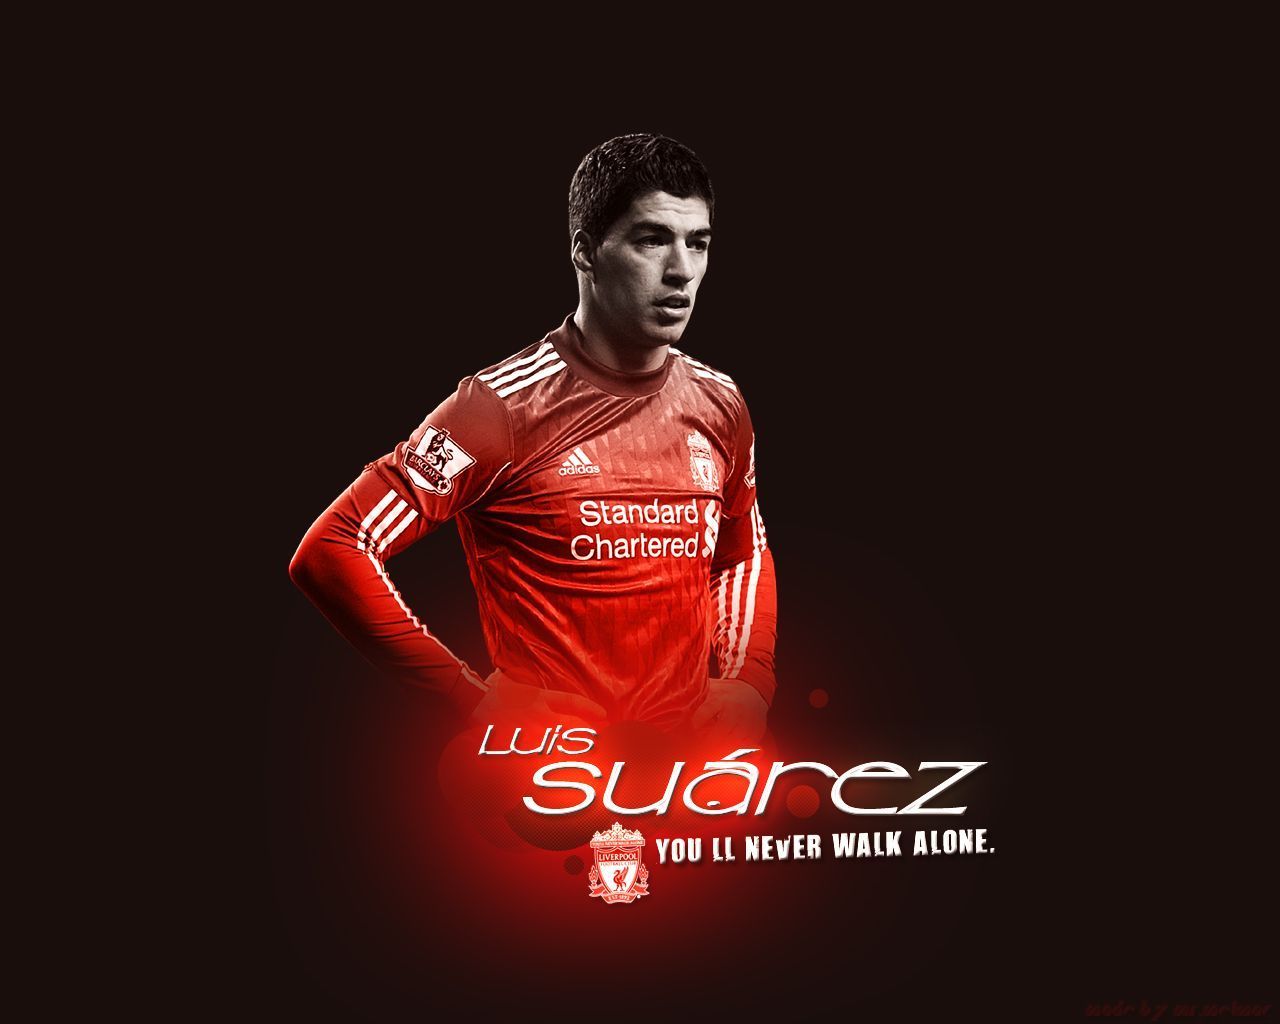 Luis Suarez Wallpapers | Full HD Pictures